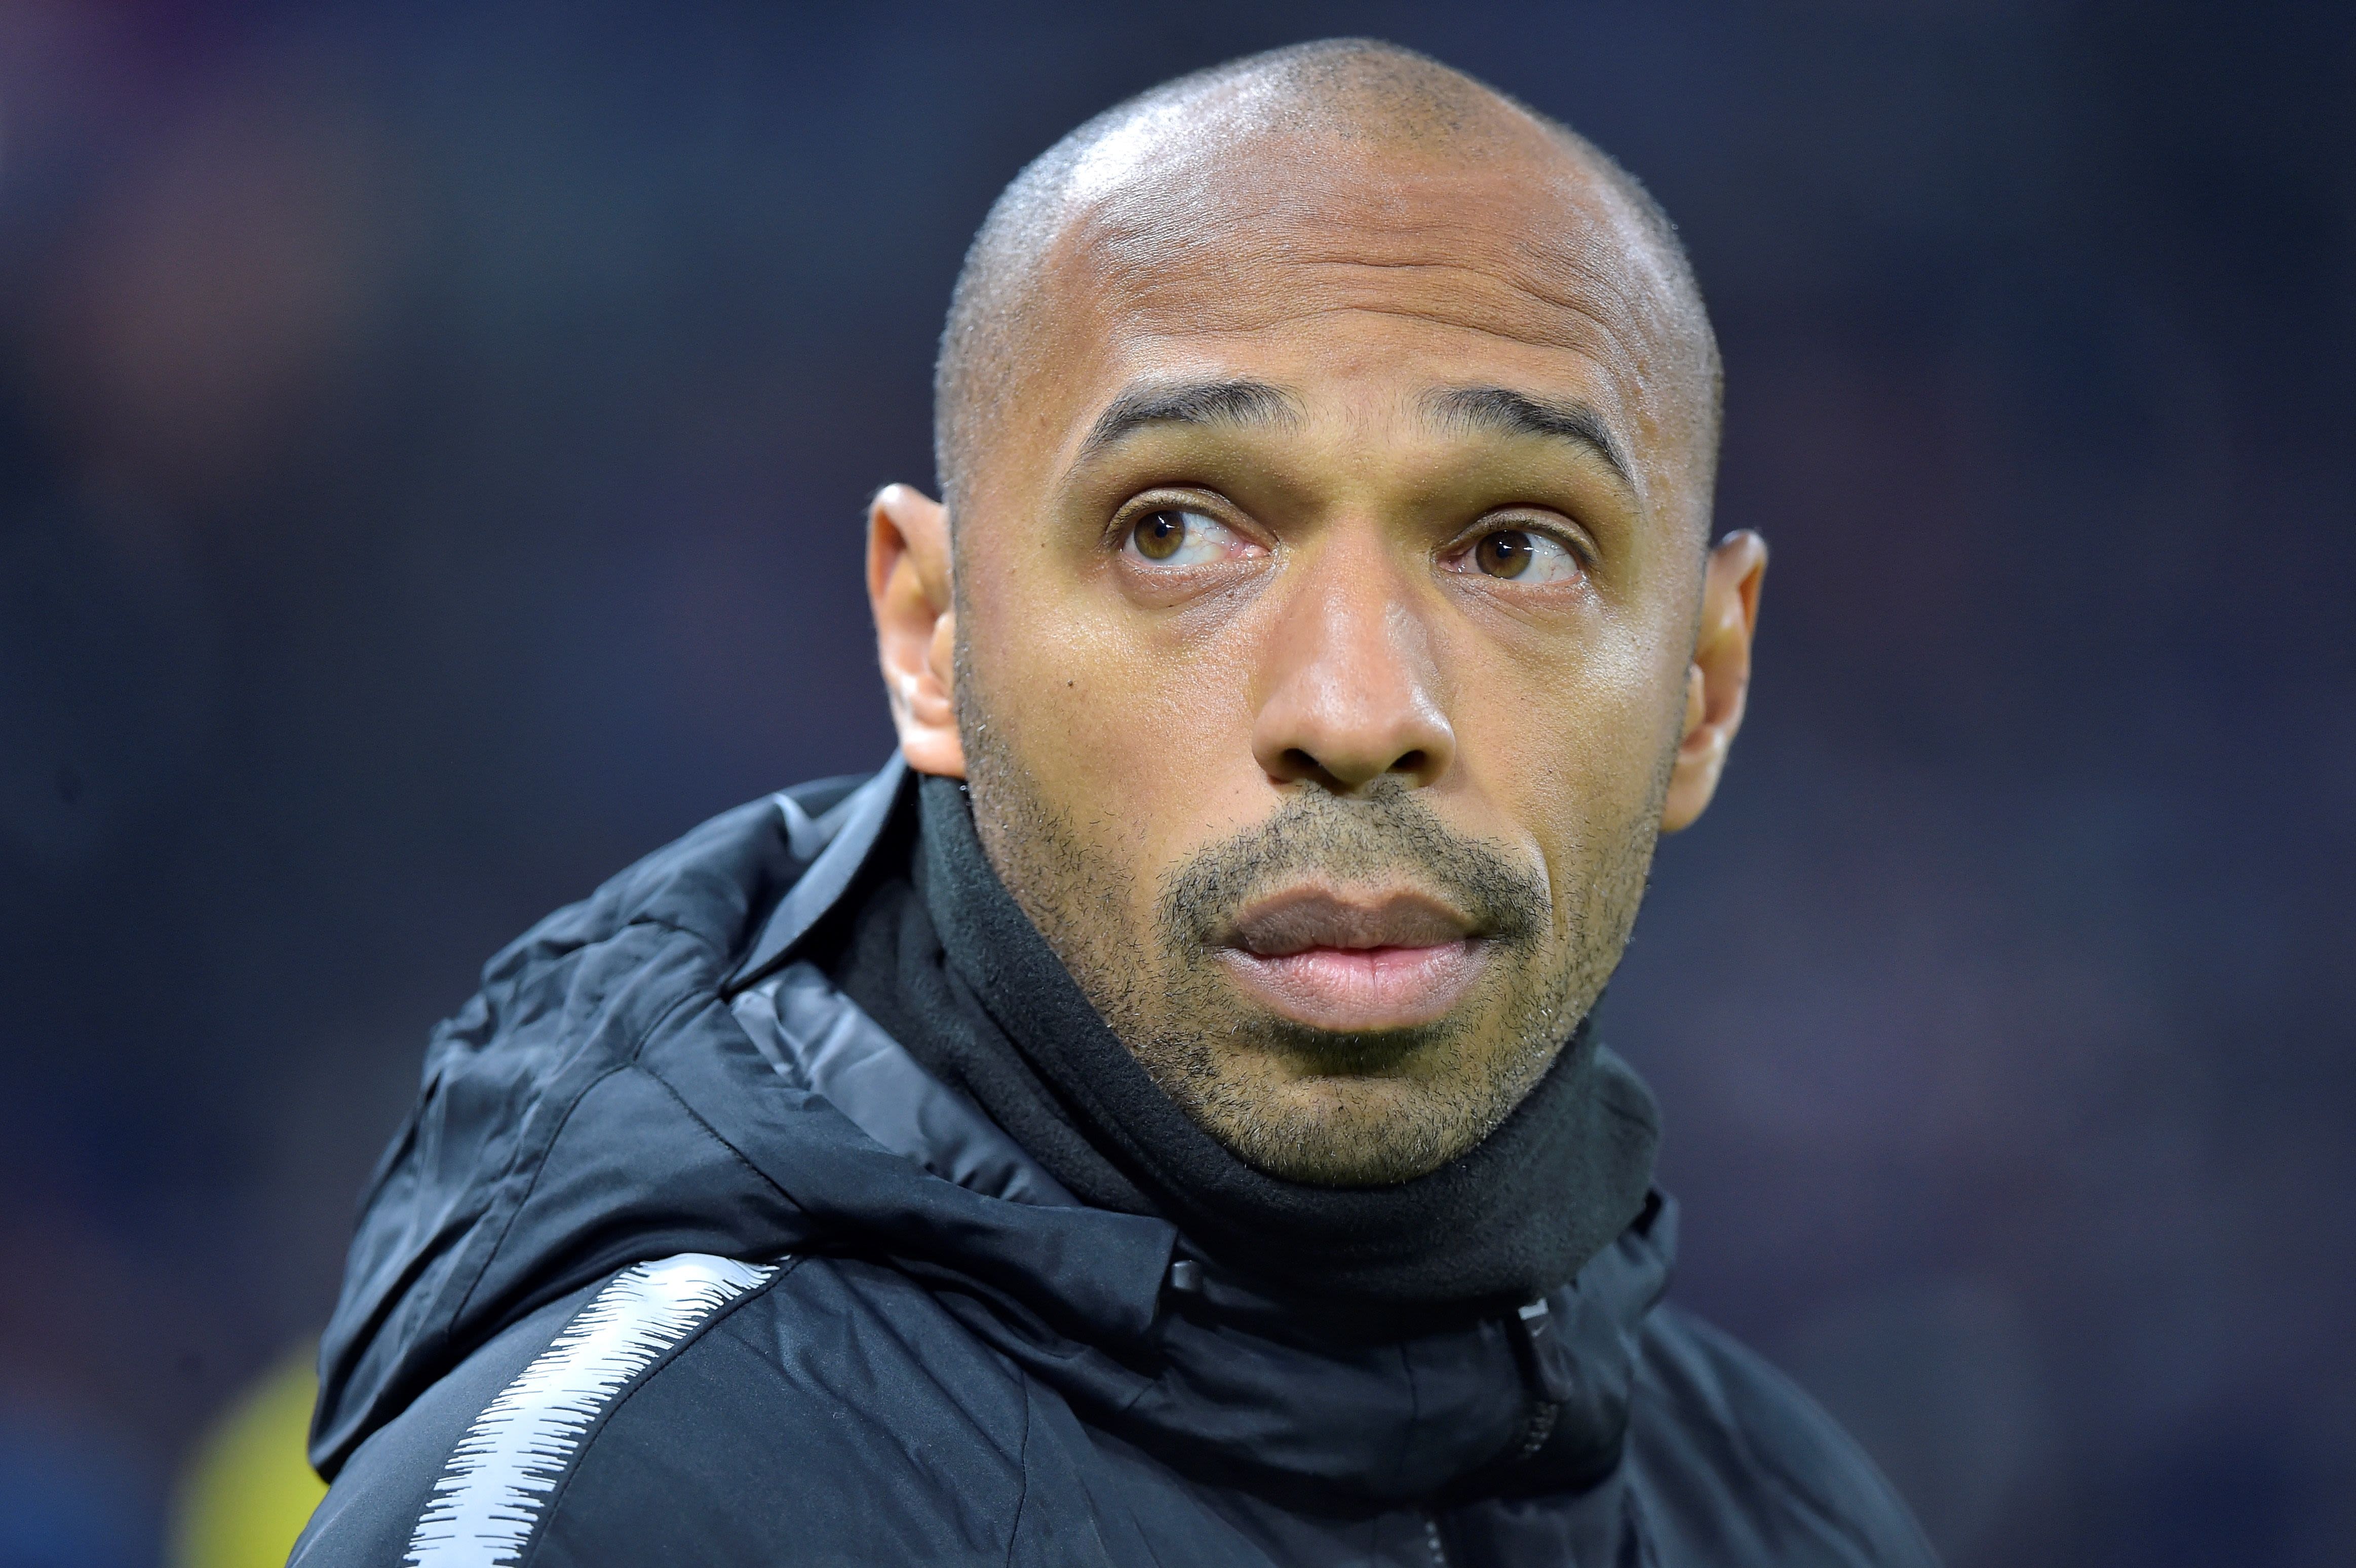 Stunning pictures of Legend, Thierry Henry and his heavily